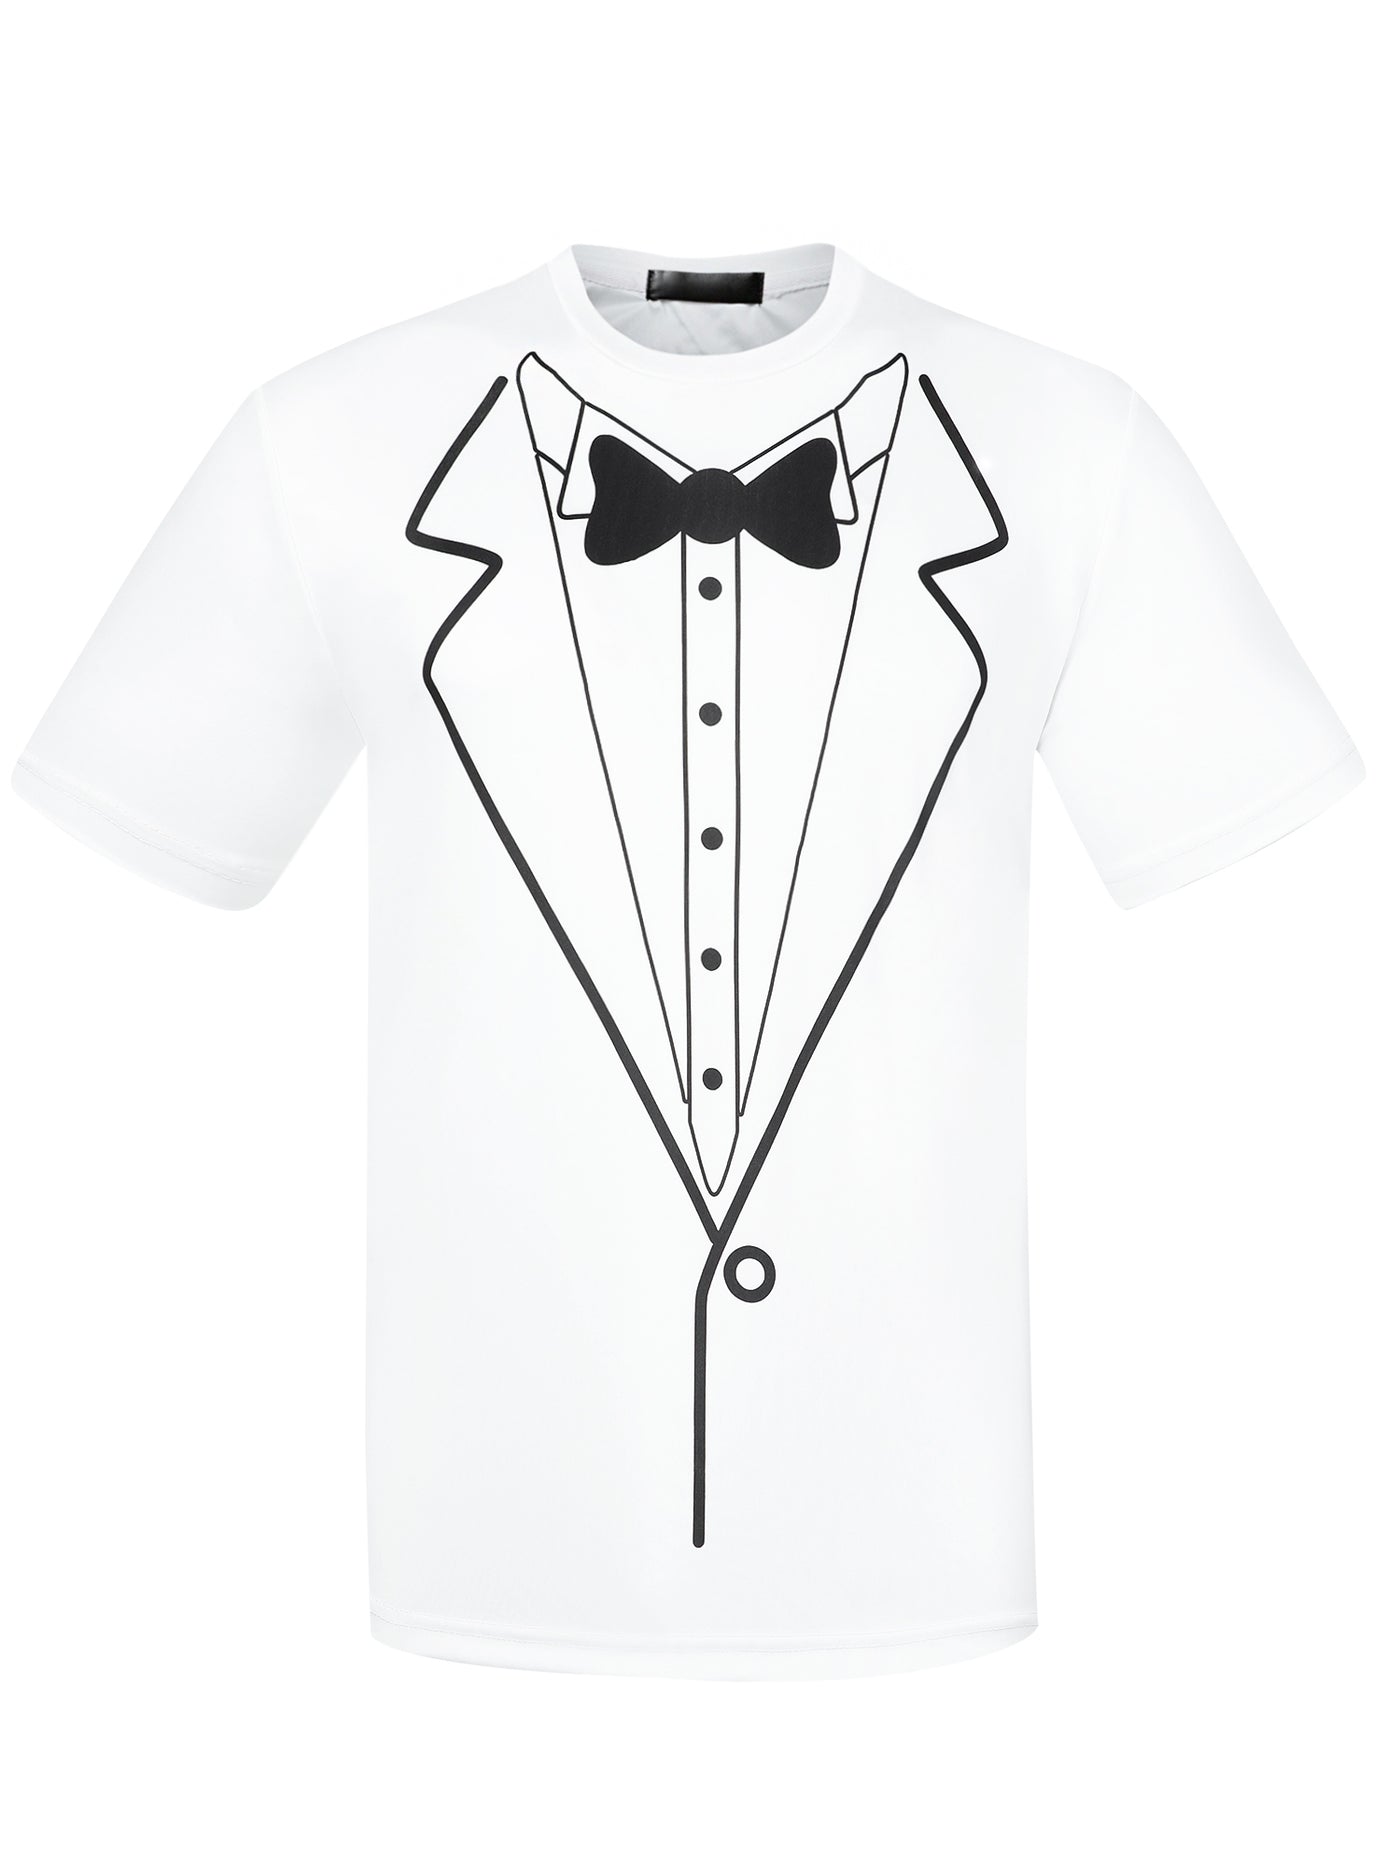 Bublédon Tuxedo Printed Costume Wedding Party Funny Graphic T-Shirt